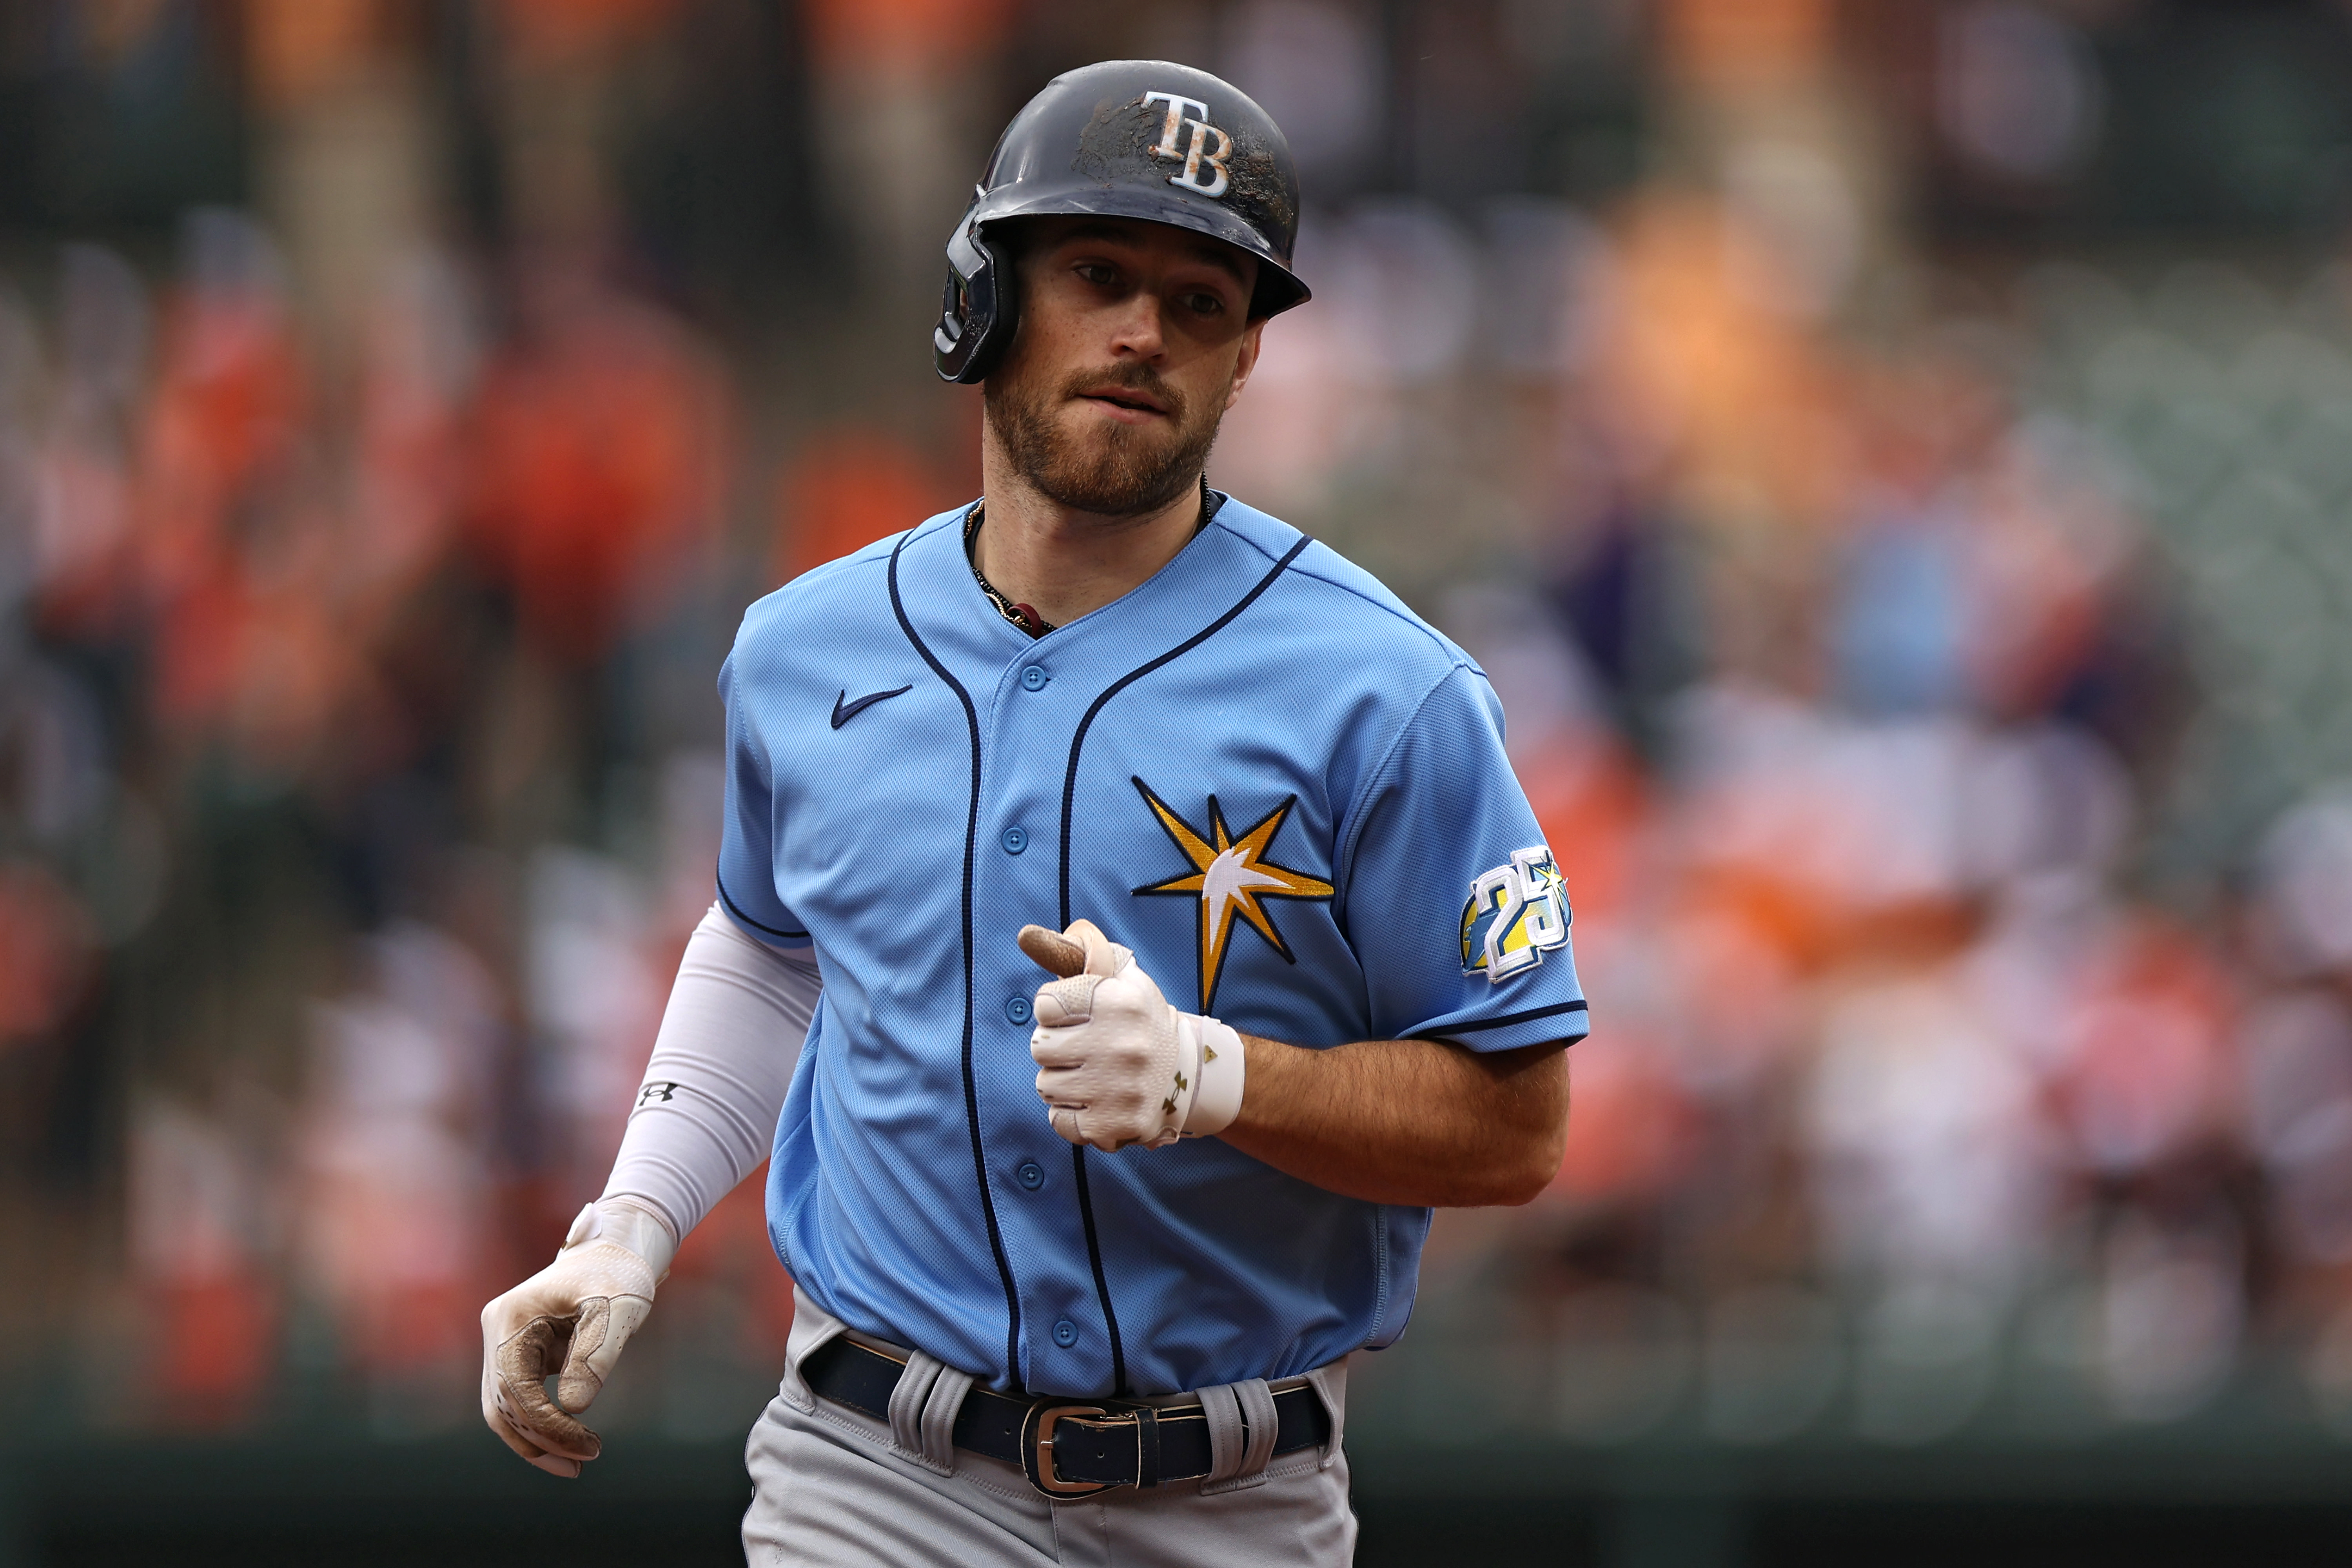 Rays set to open playoffs, shake off playoff disappointment